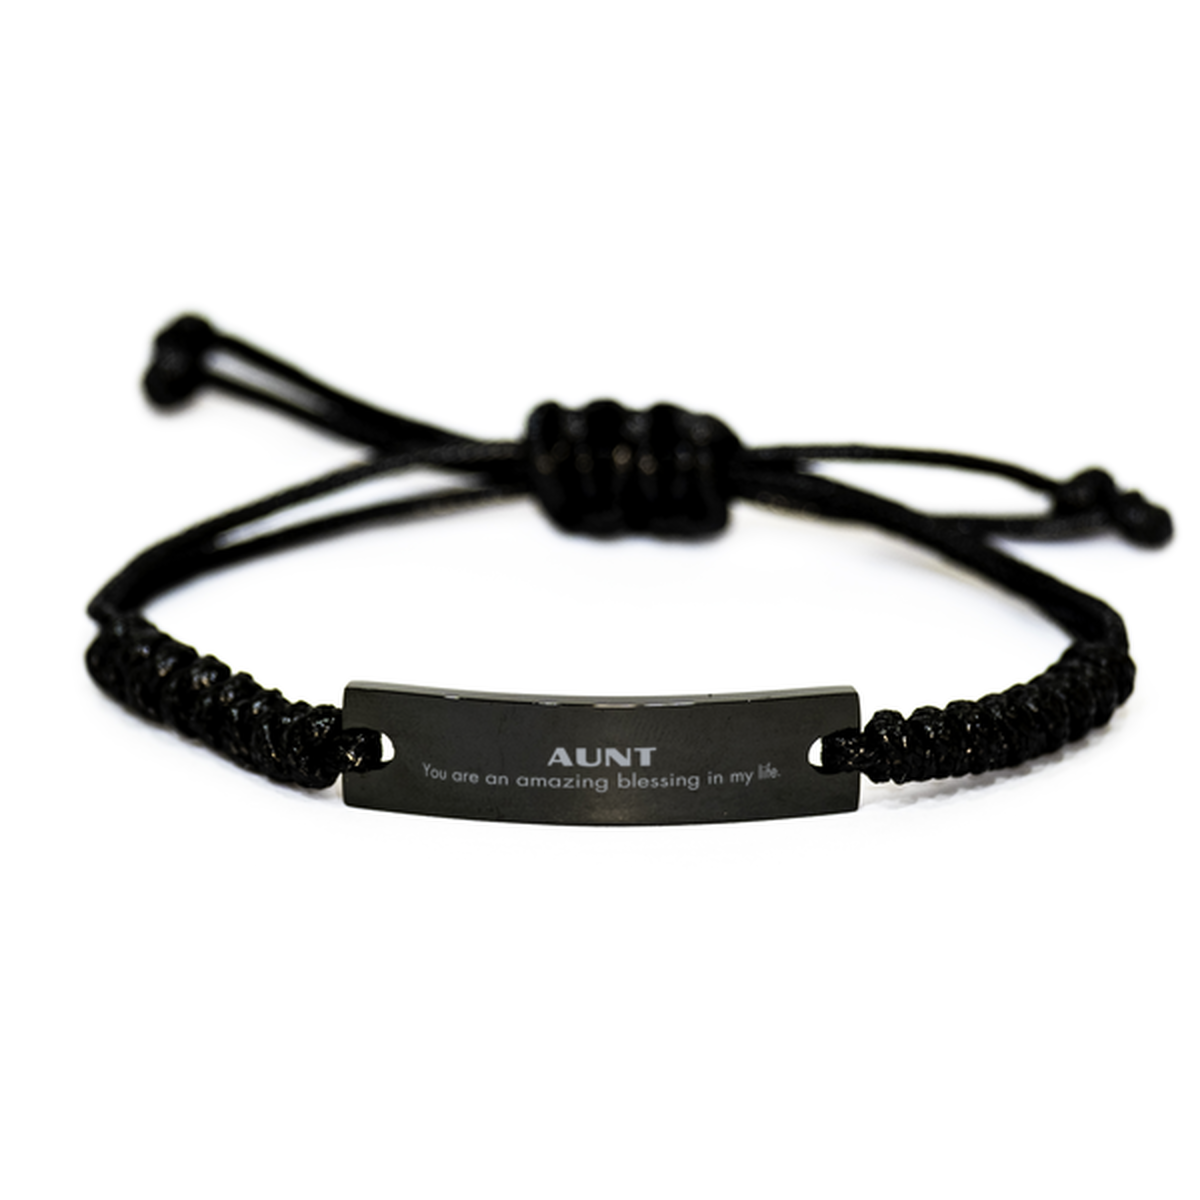 Aunt Black Rope Bracelet, You are an amazing blessing in my life, Thank You Gifts For Aunt, Inspirational Birthday Christmas Unique Gifts For Aunt